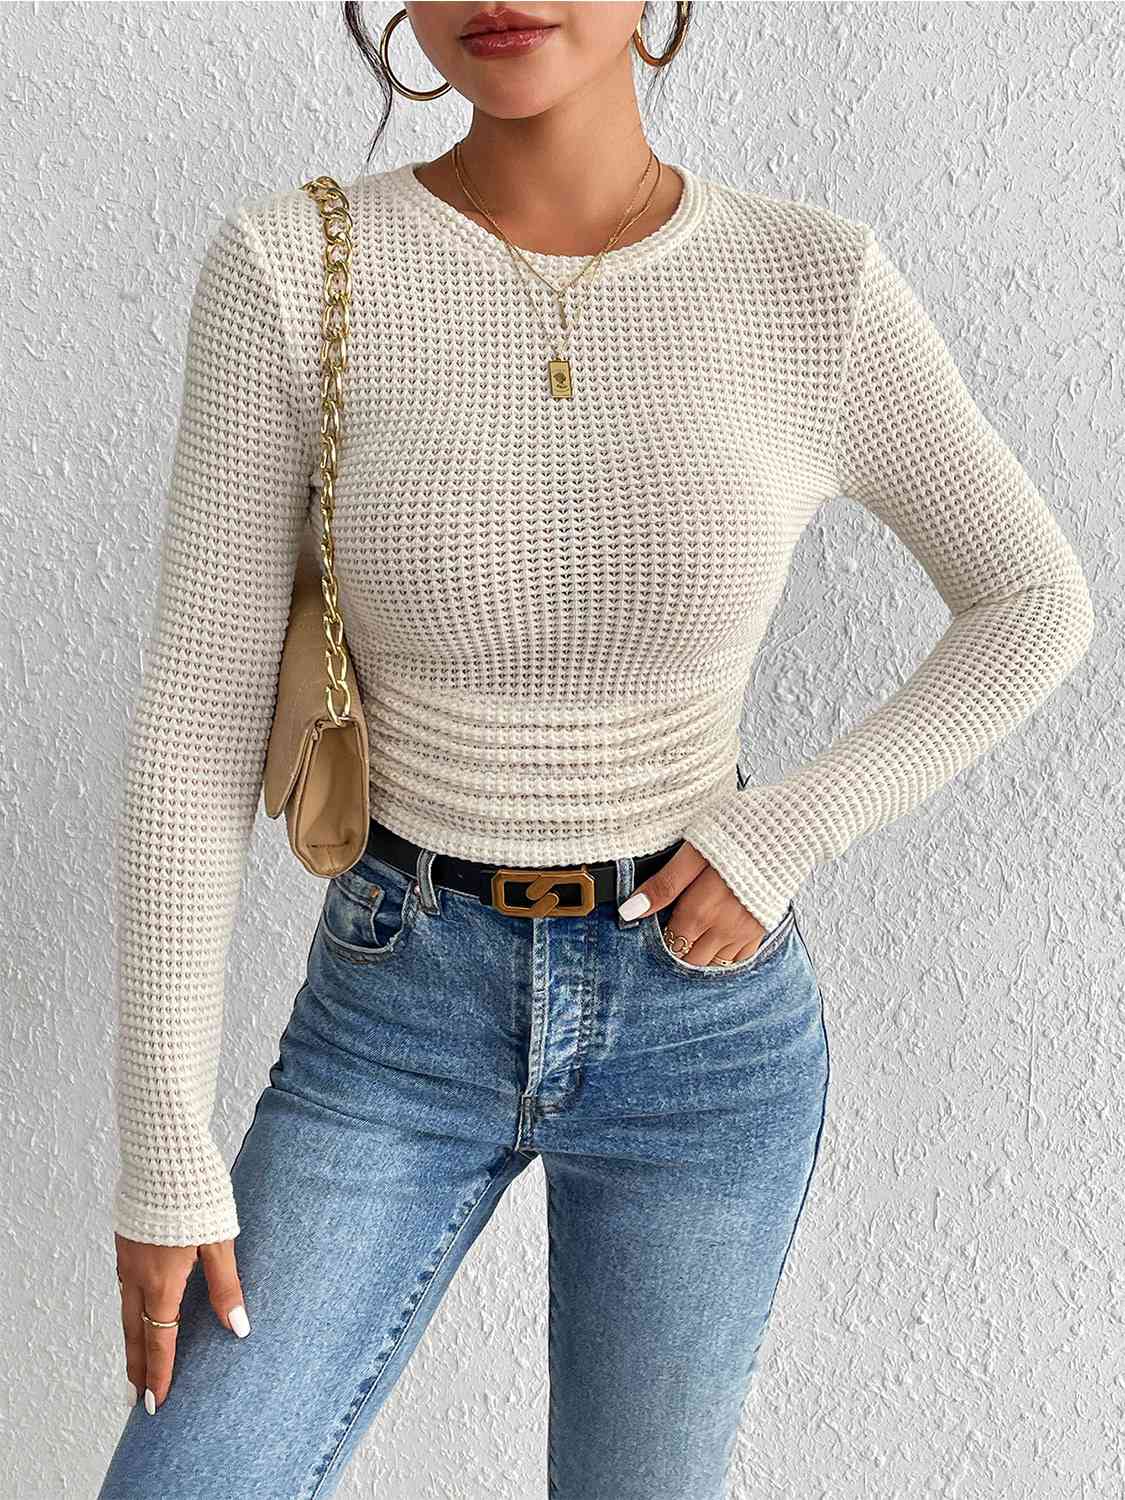 Eyelet Ruched Knit Top